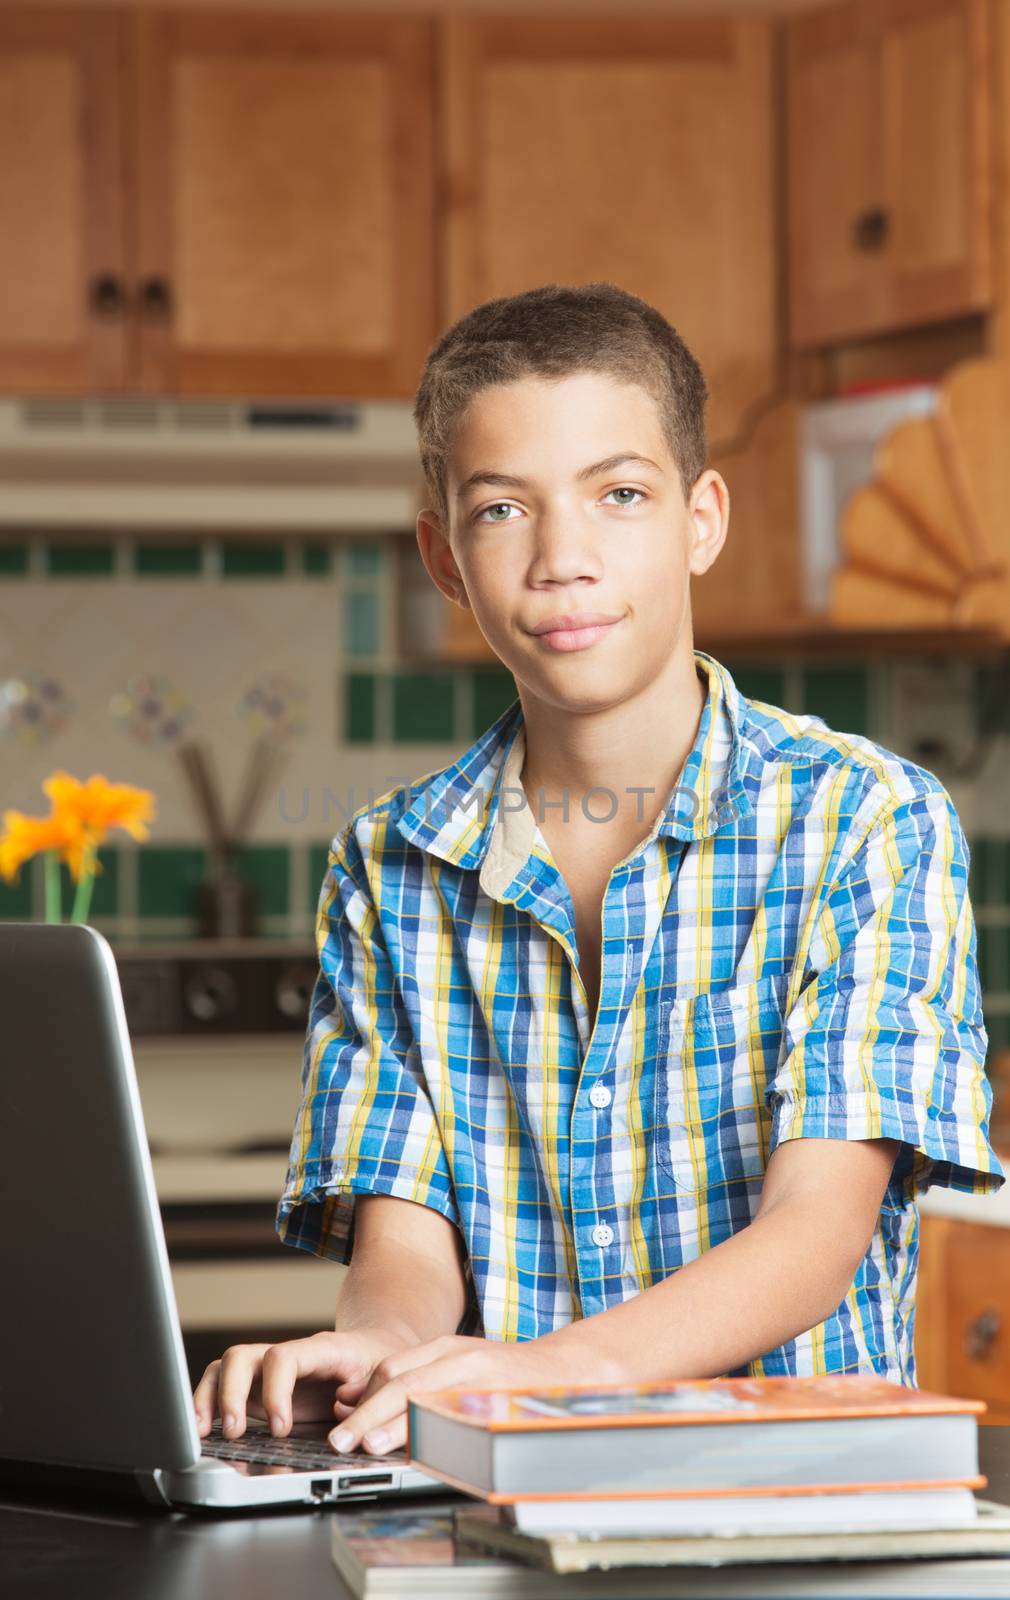 Grinning teen with laptop and textbooks by Creatista